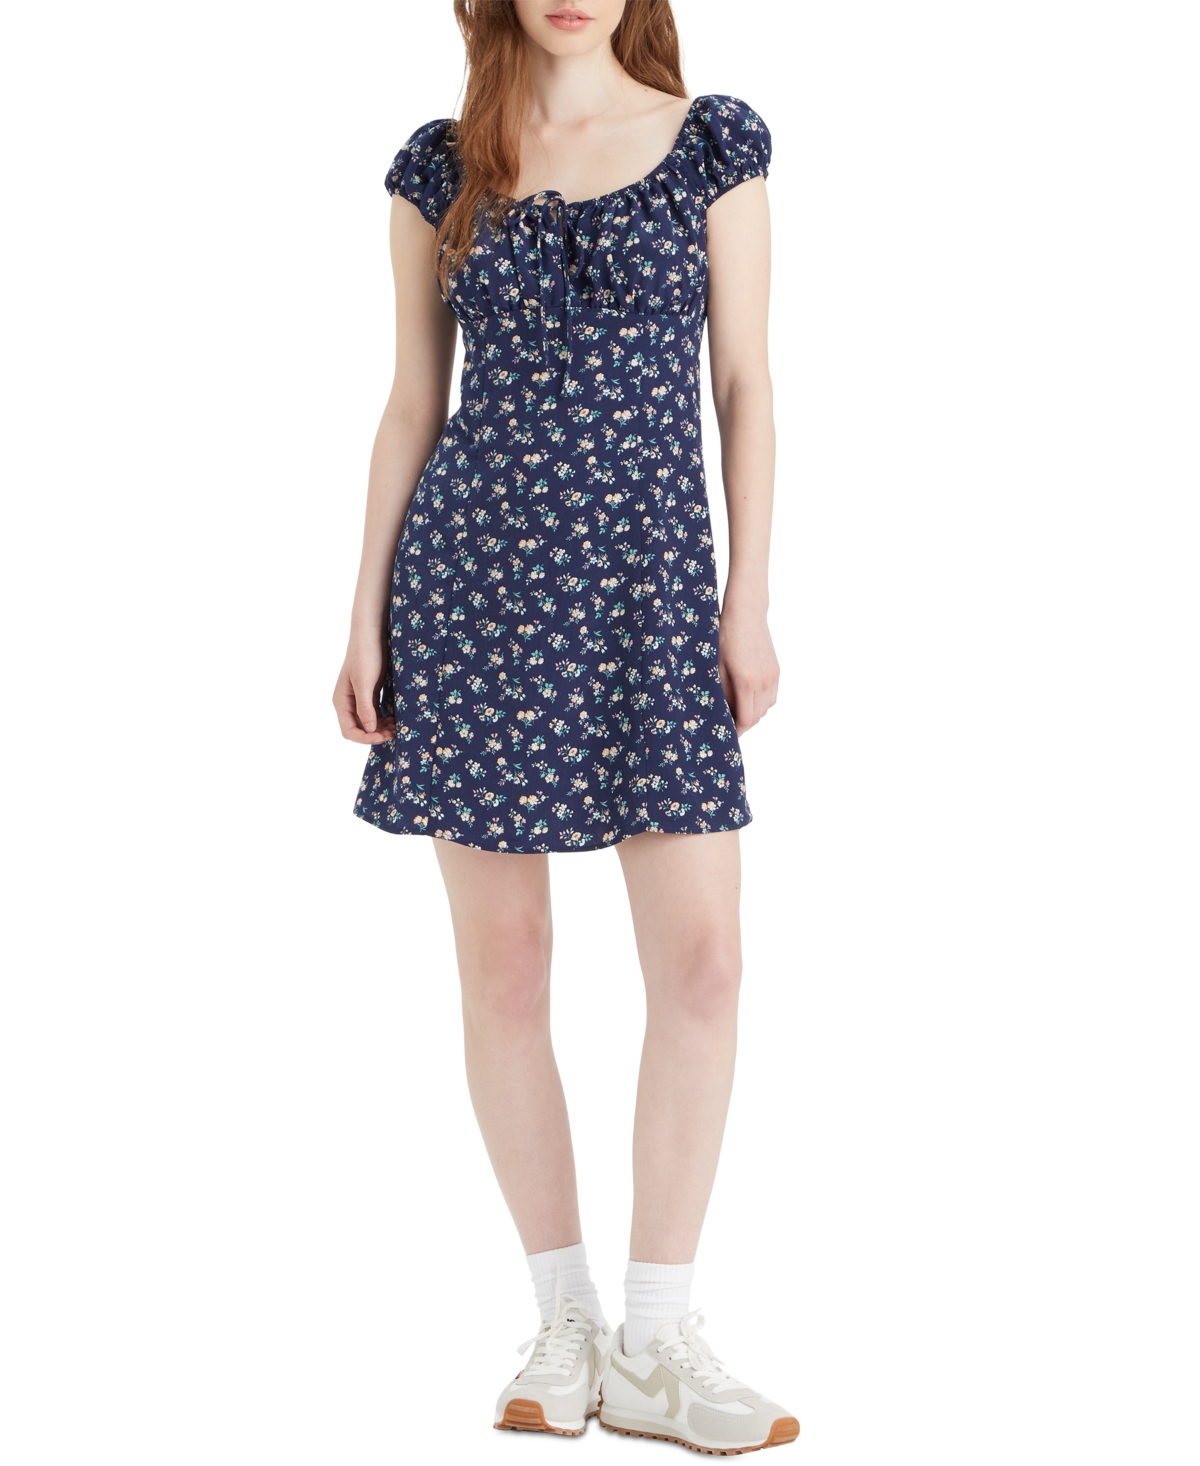 Levi's Women's Clementine Printed Cap-sleeve Dress In Picnic Ditzy Naval Academy